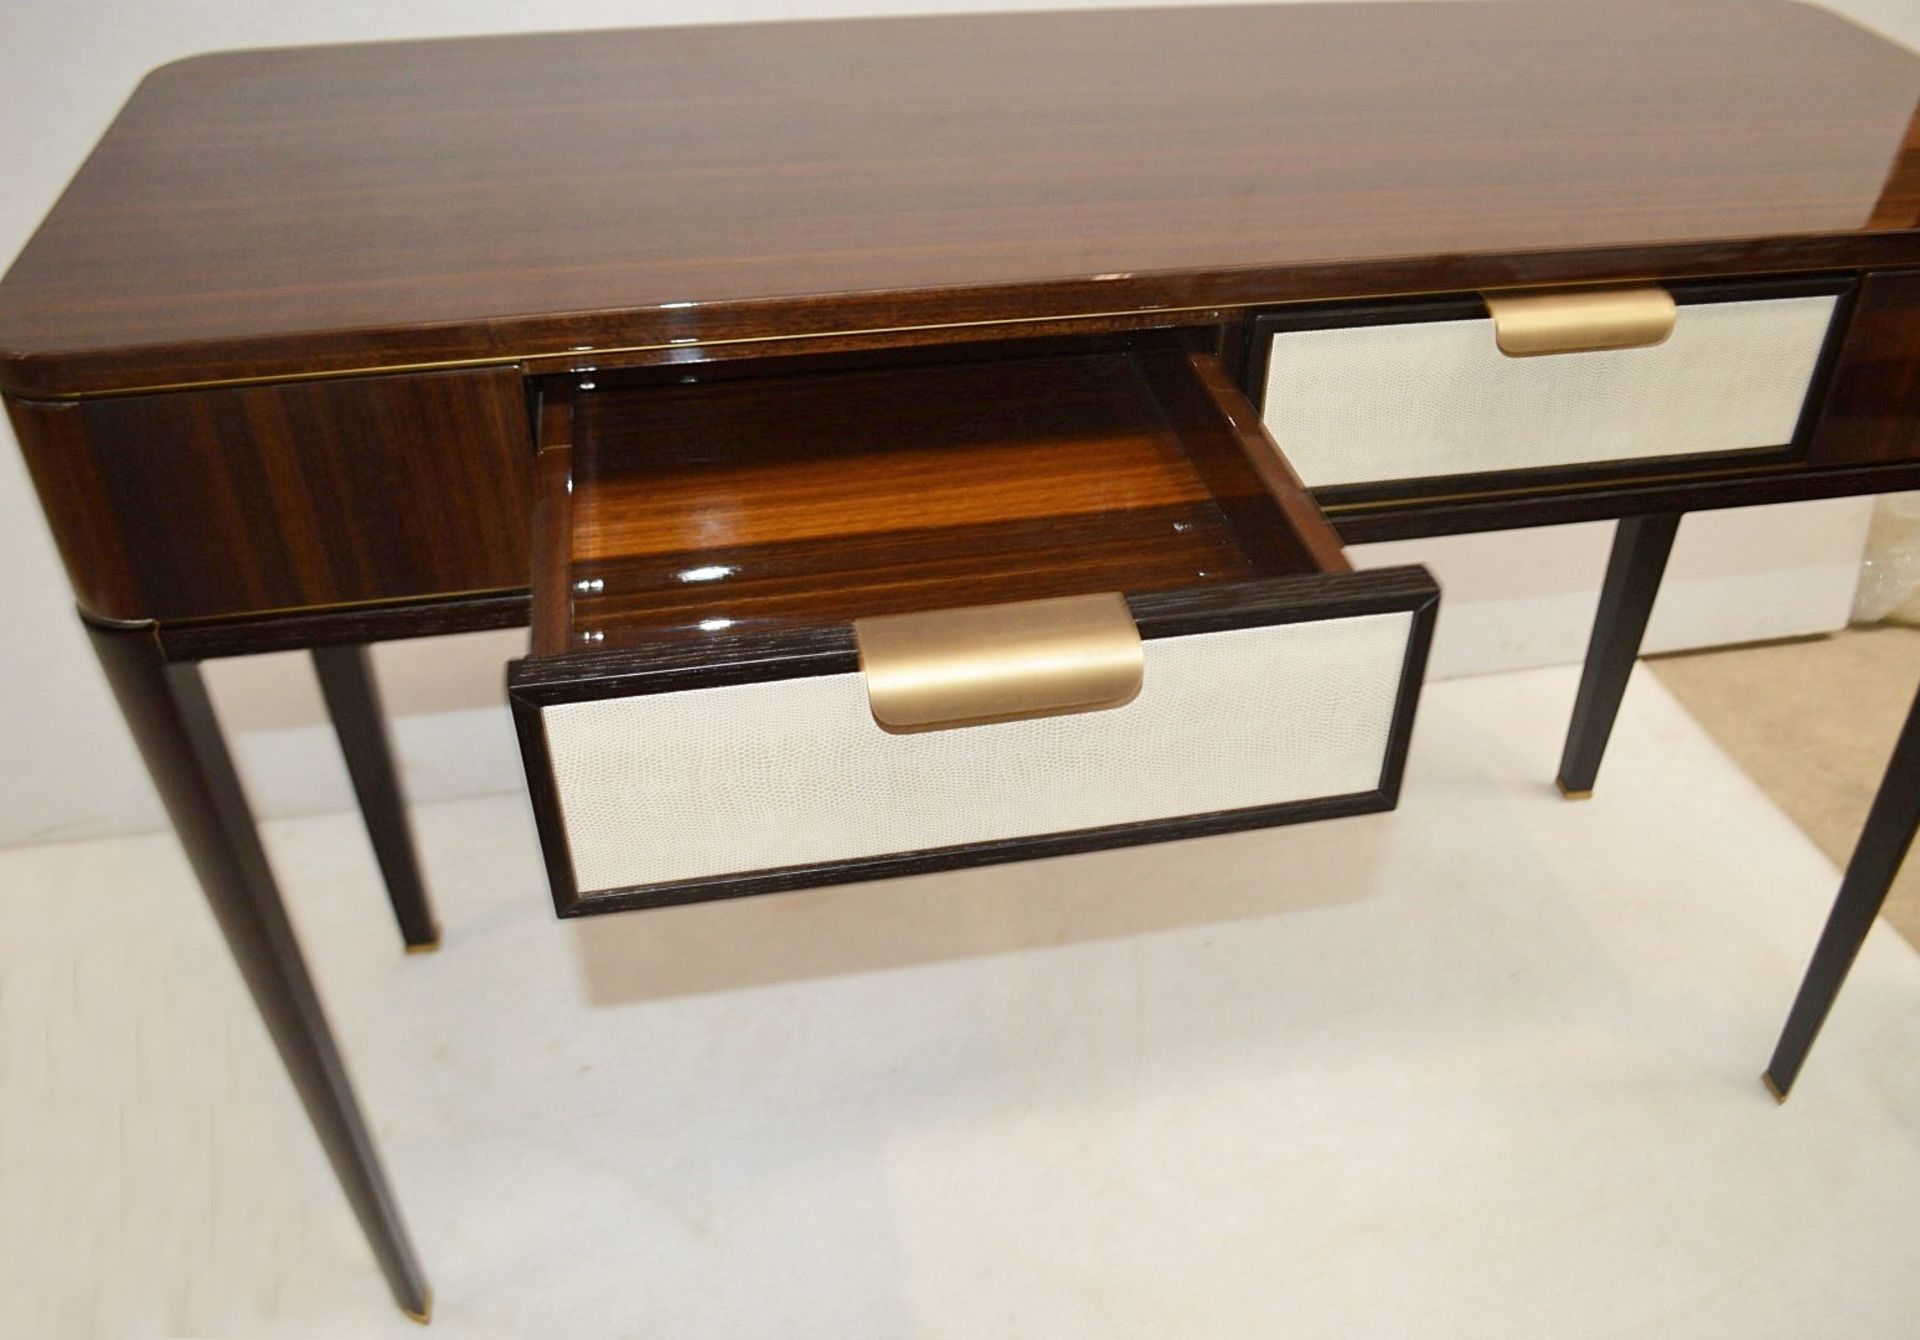 1 x FRATO 'Mandalay' Luxury Designer 2-Drawer Dresser Dressing Table In A Gloss Finish - RRP £4,300 - Image 8 of 17